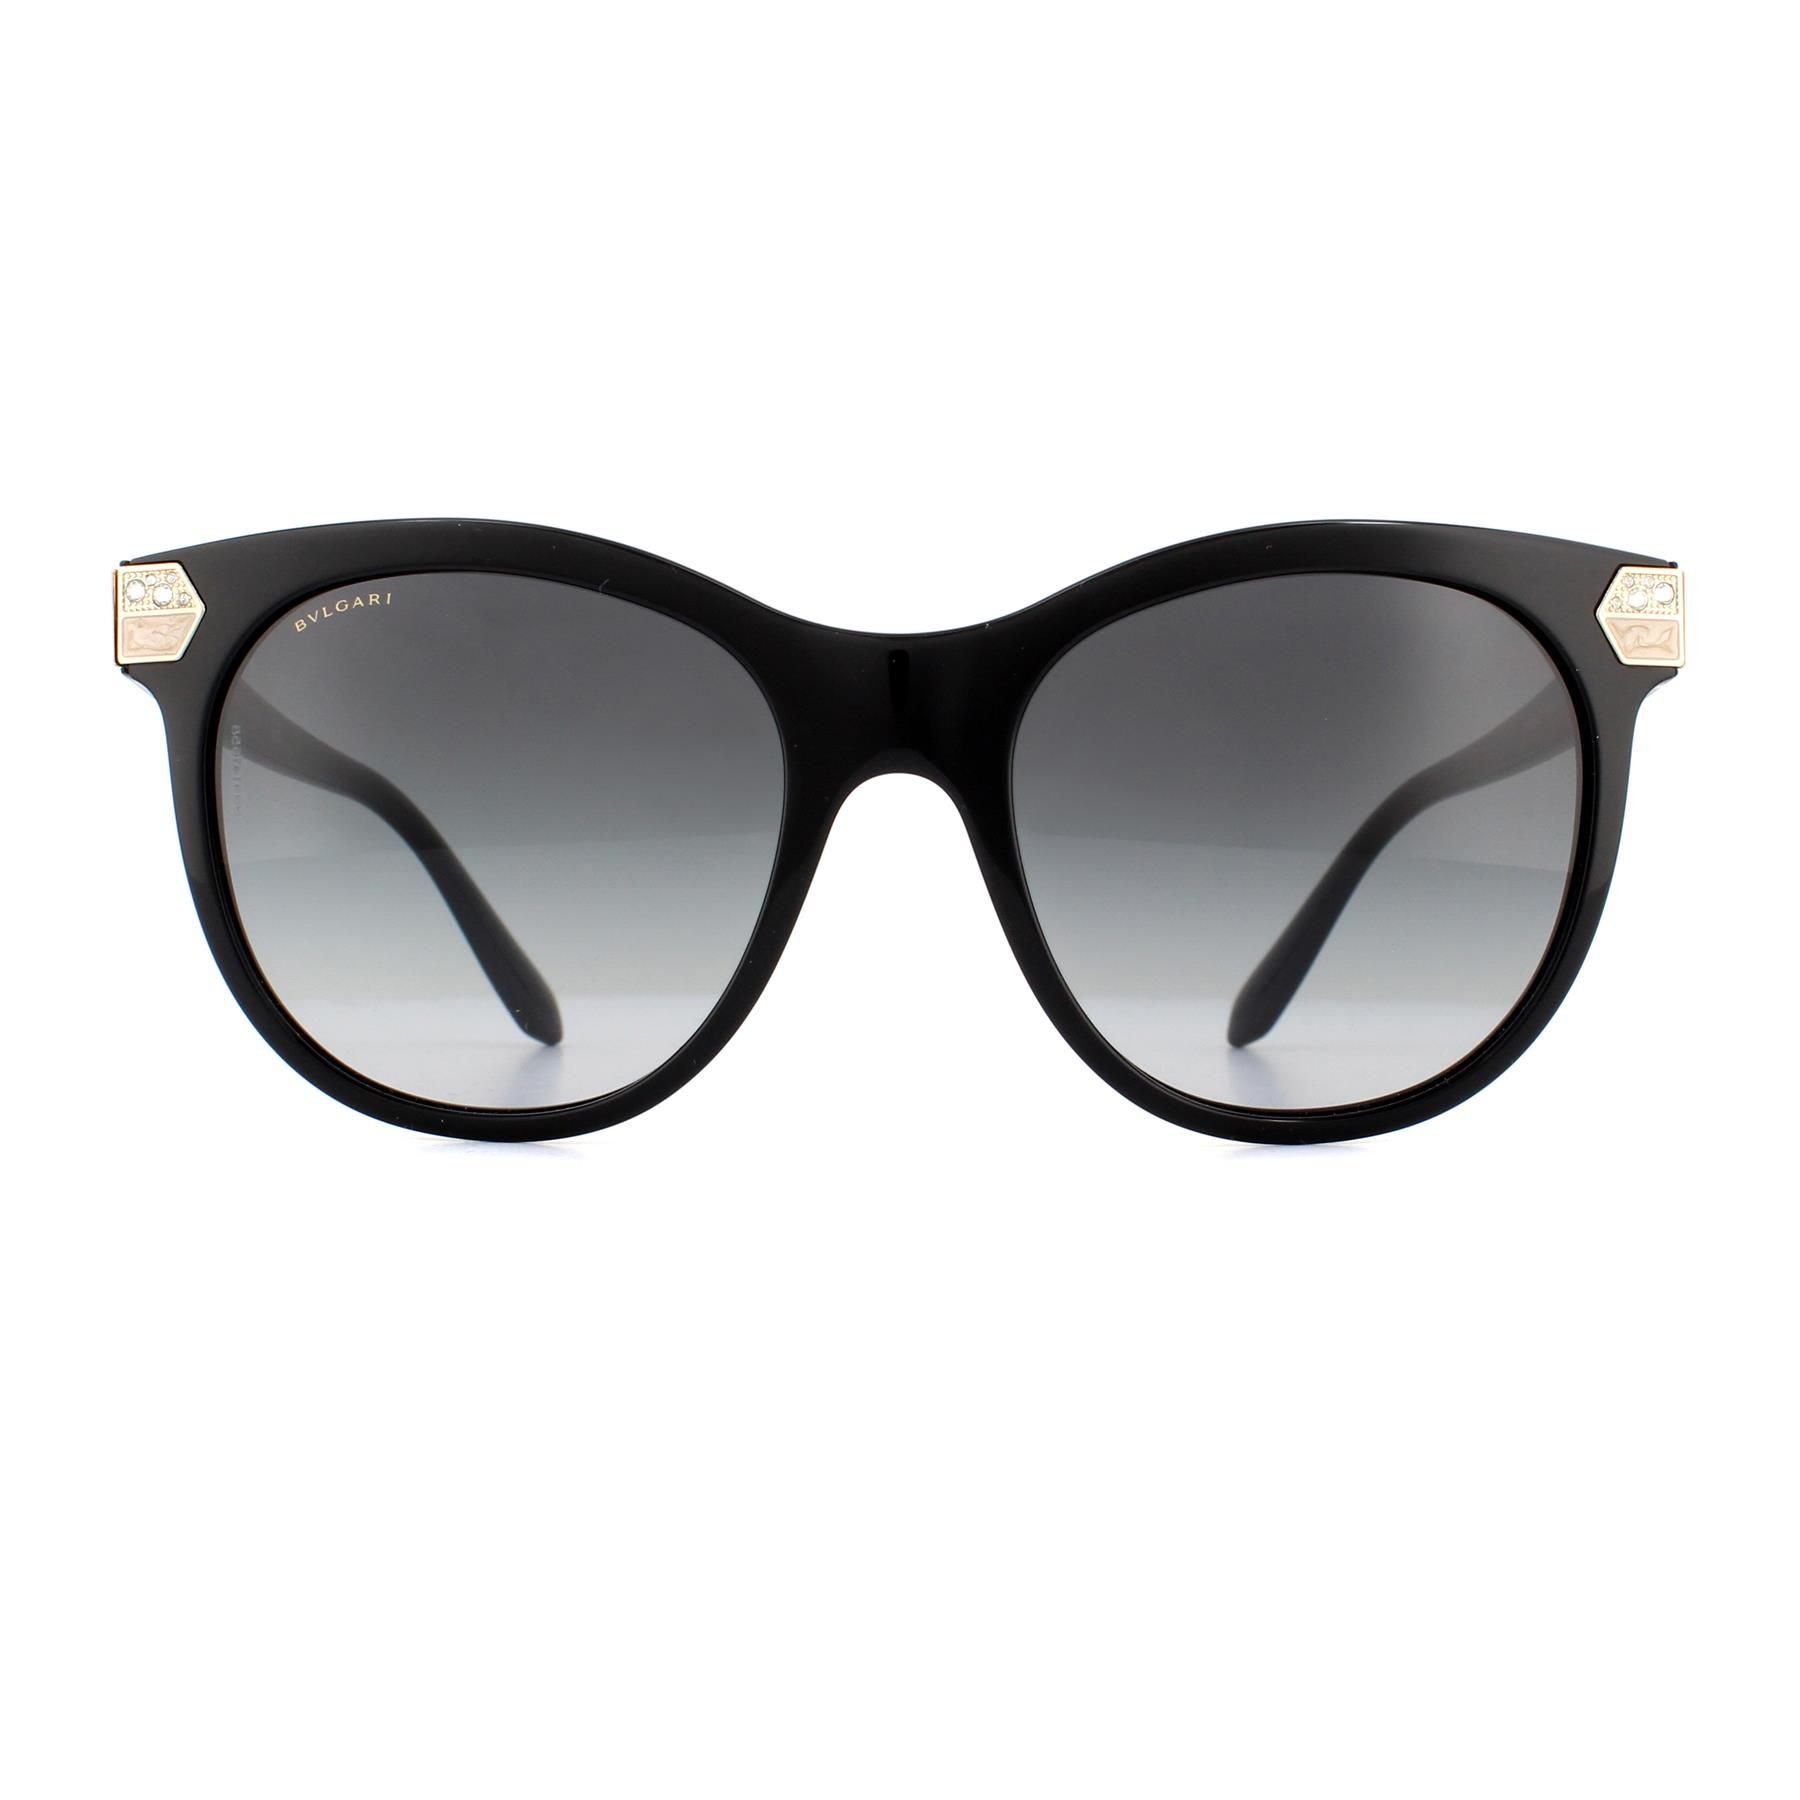 Bvlgari 8185b 501/8g sunglasses have a black frame with a grey gradient lens. They are made of plastic and have a round shape and are for women.